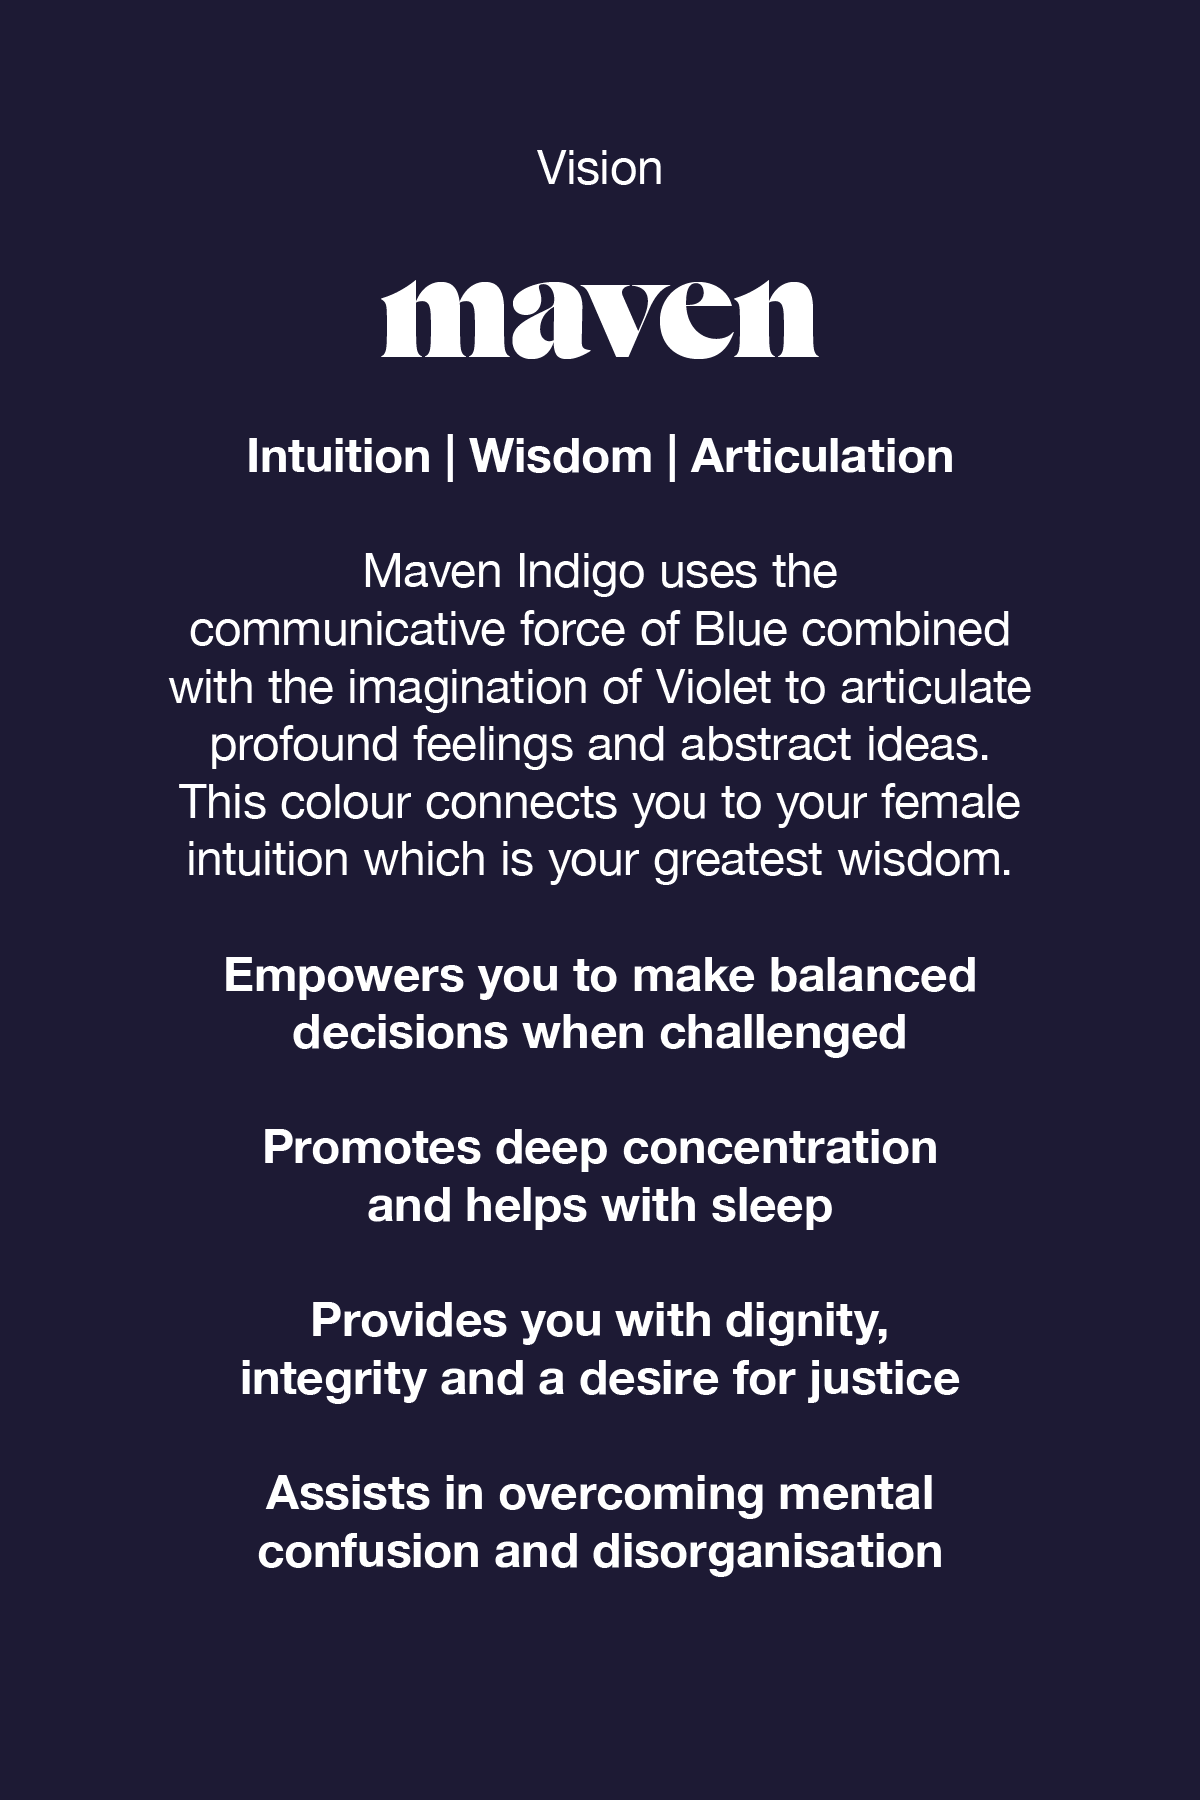 Videris Lingerie Maven represents vision, our intuition, acticulation and wisdom